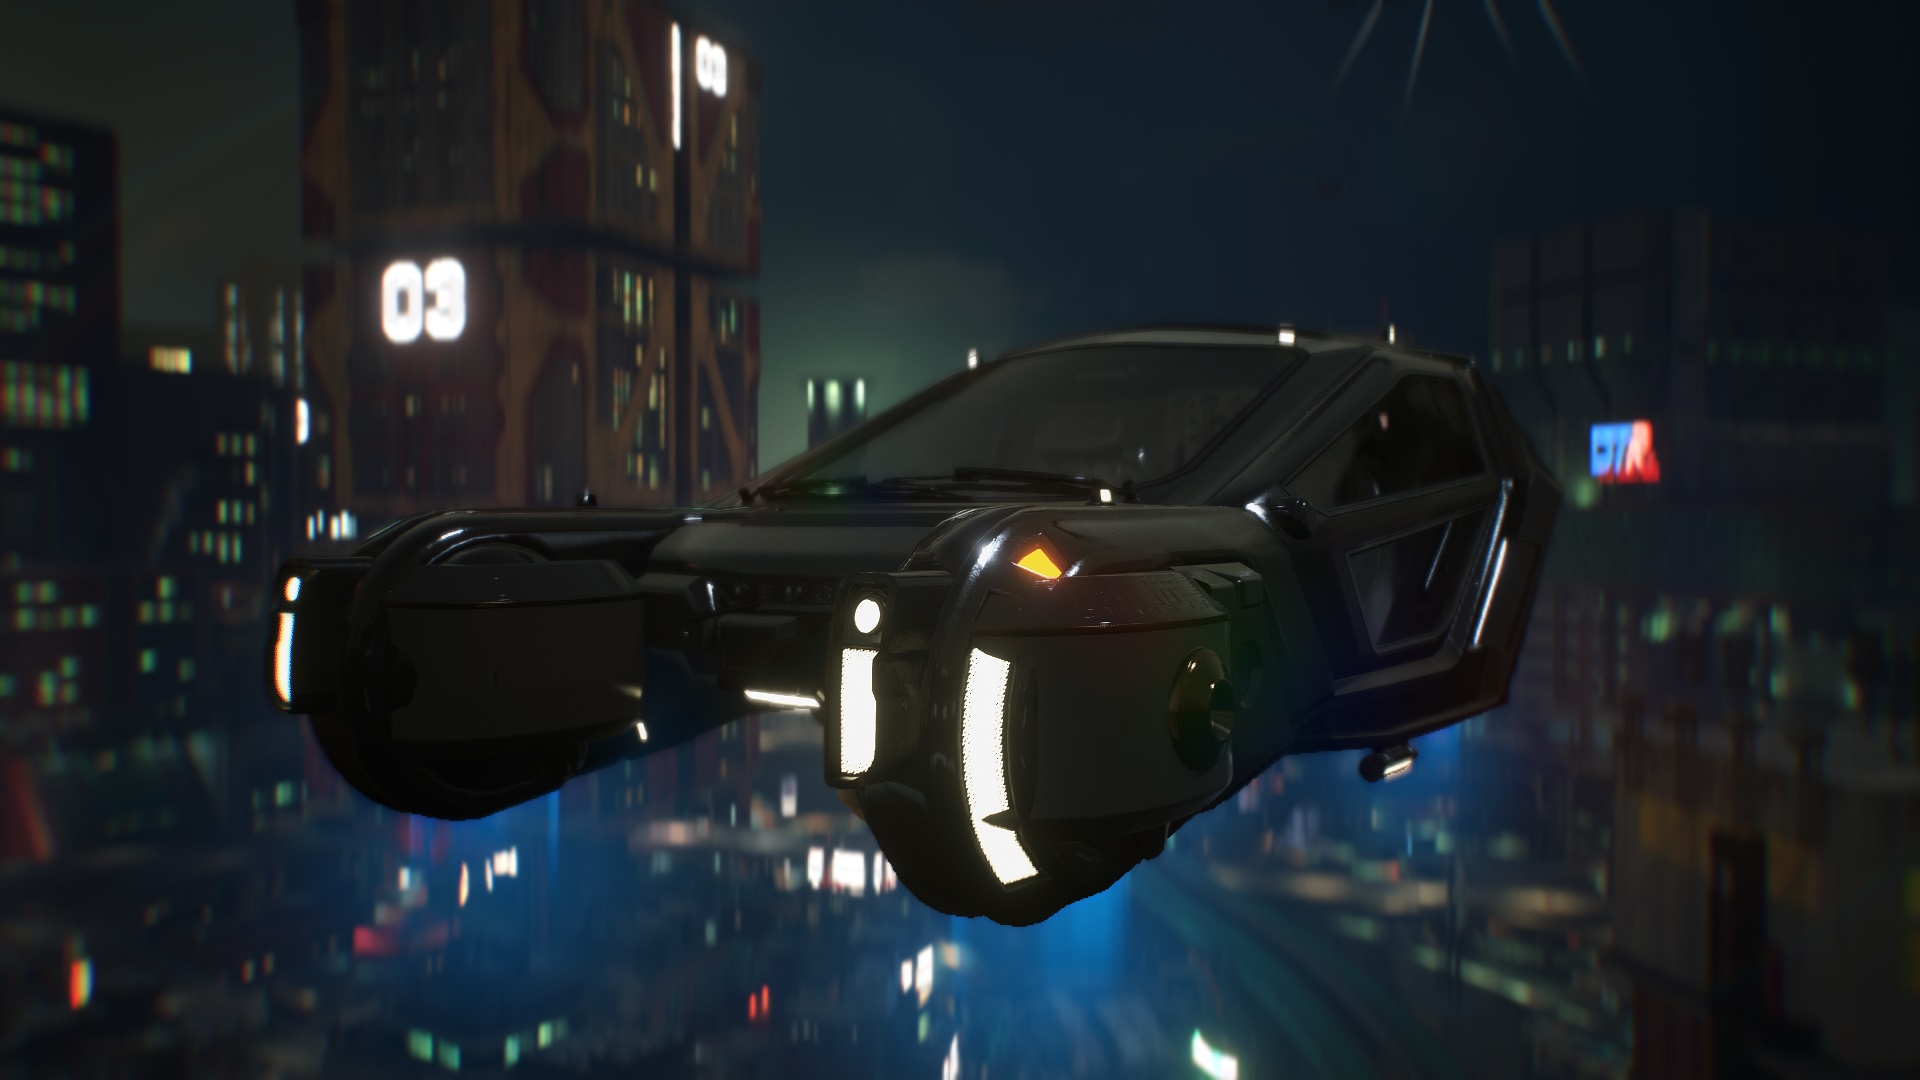 This flying automotive from Blade Runner feels right at residence modded into Cyberpunk 2077